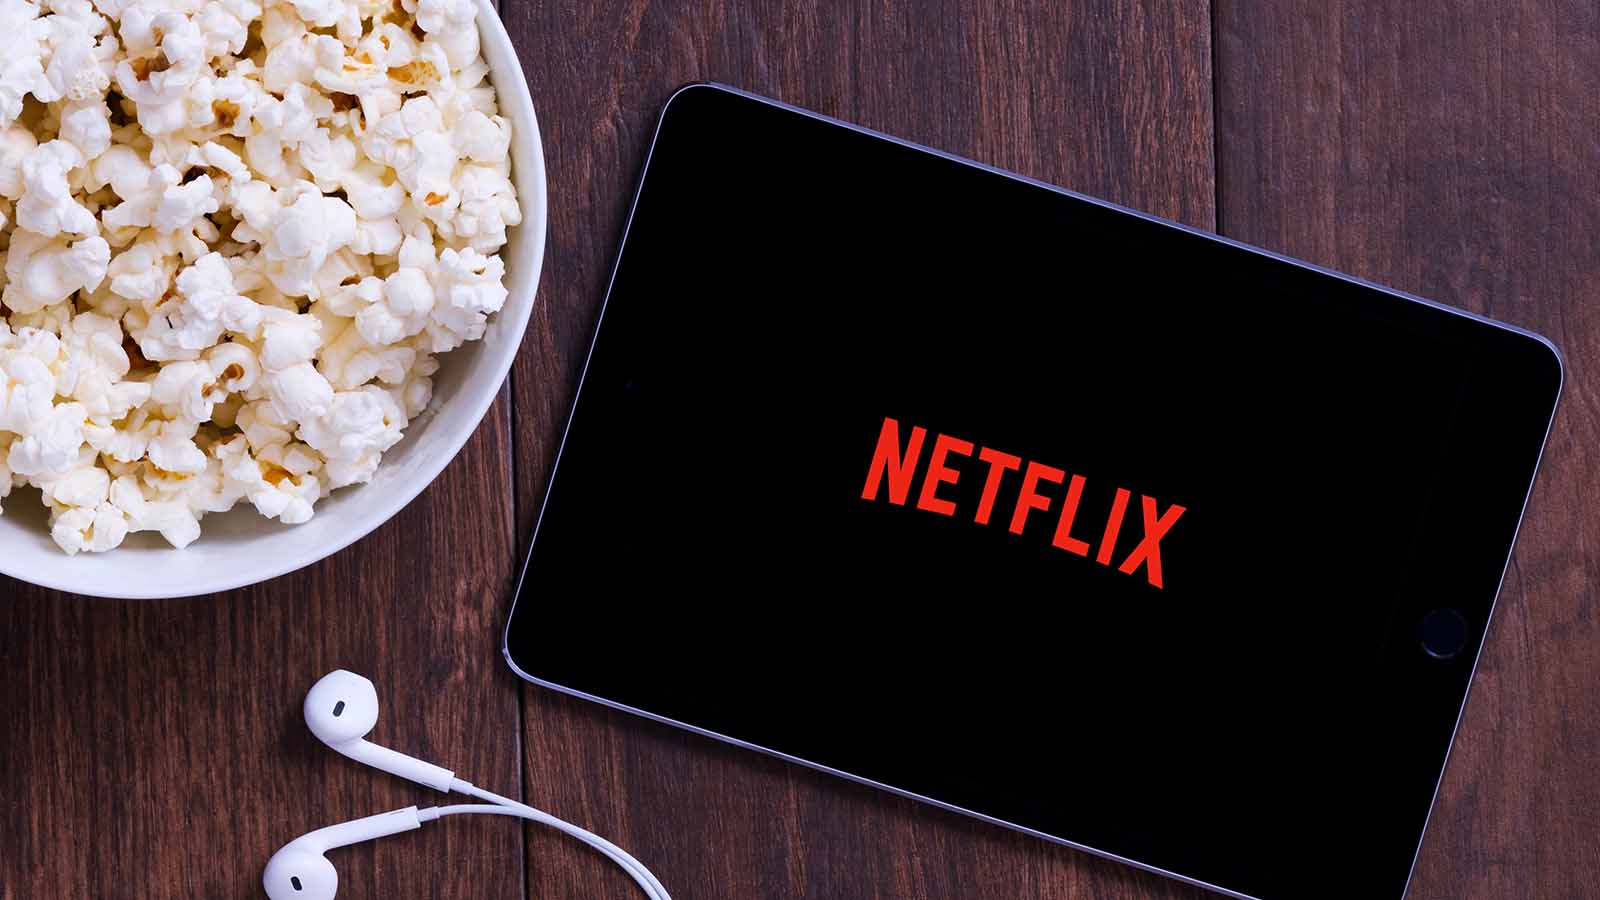 The Netflix (NFLX) logo on a tablet with earbuds and a nearby bowl of popcorn.